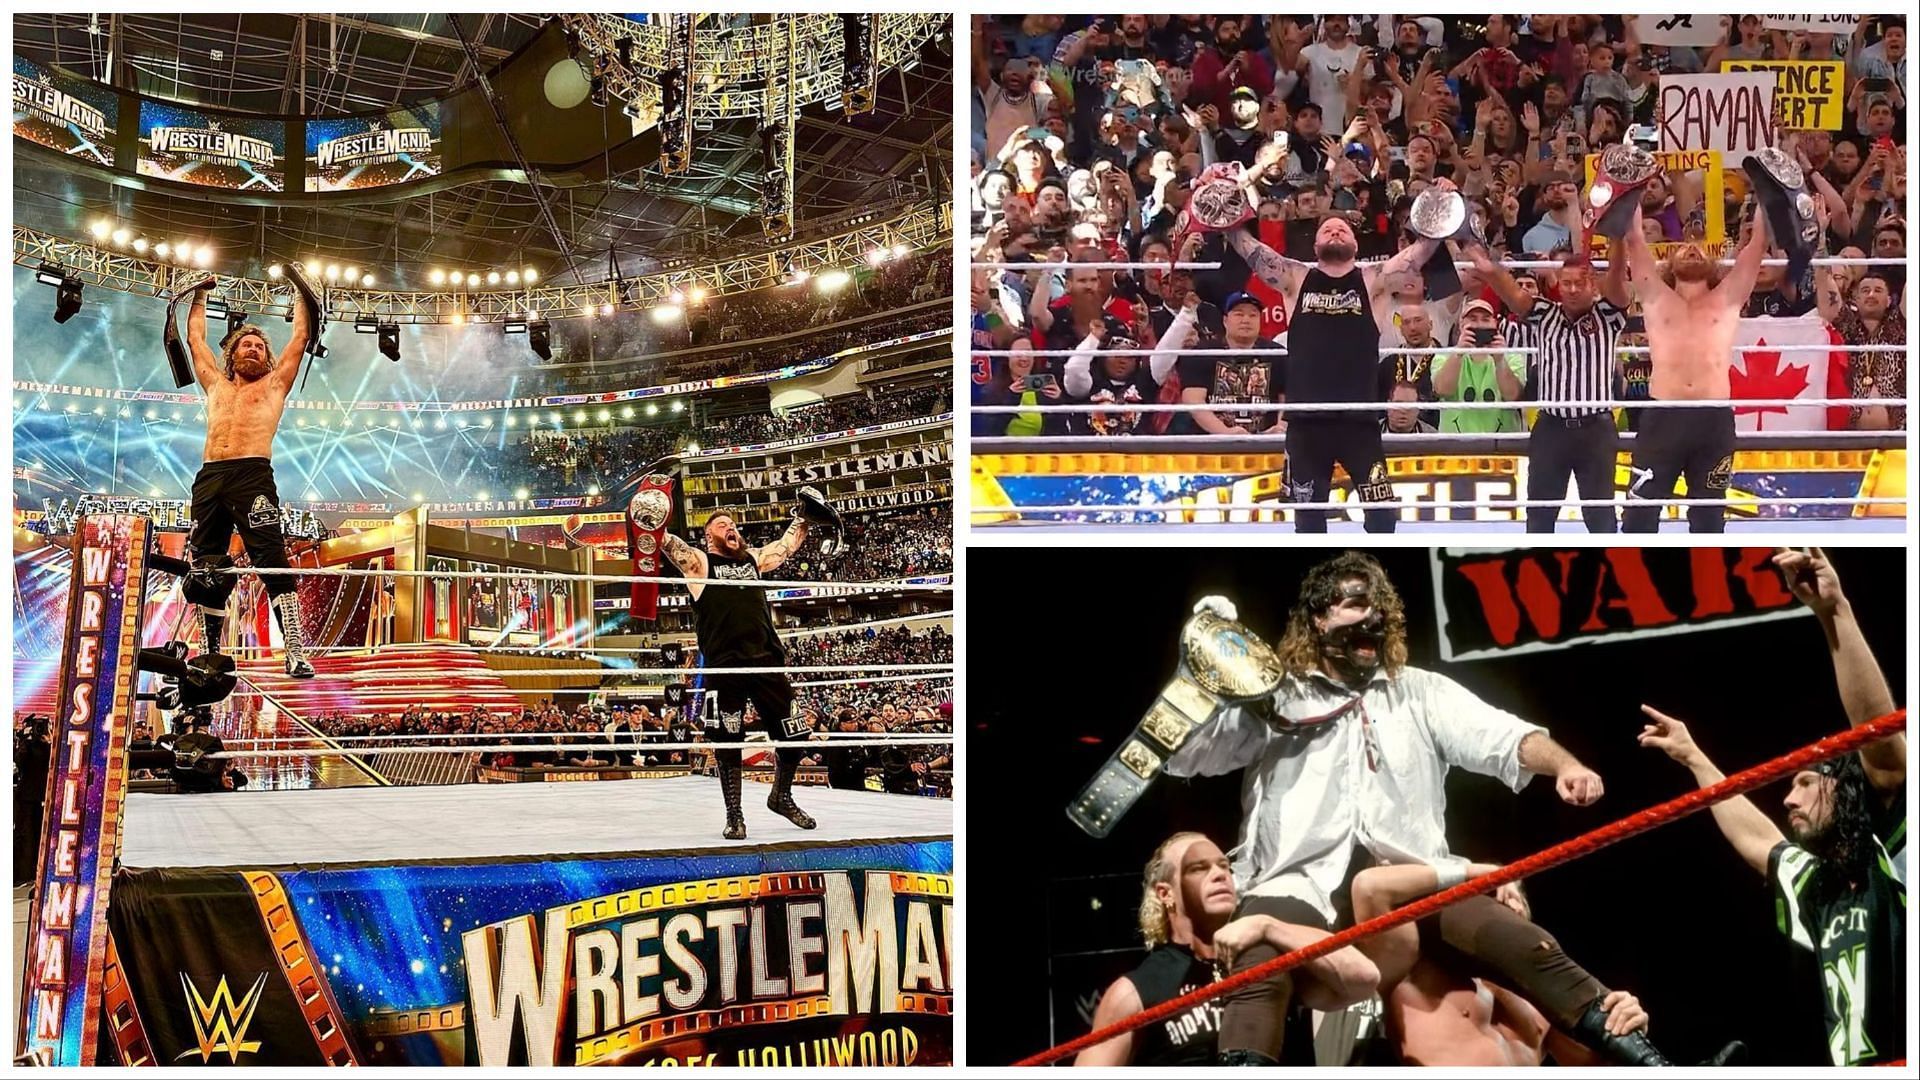 WWE wrestling fans celebrated the title wins of Kevin Owens, Sami Zayn, and Mankind